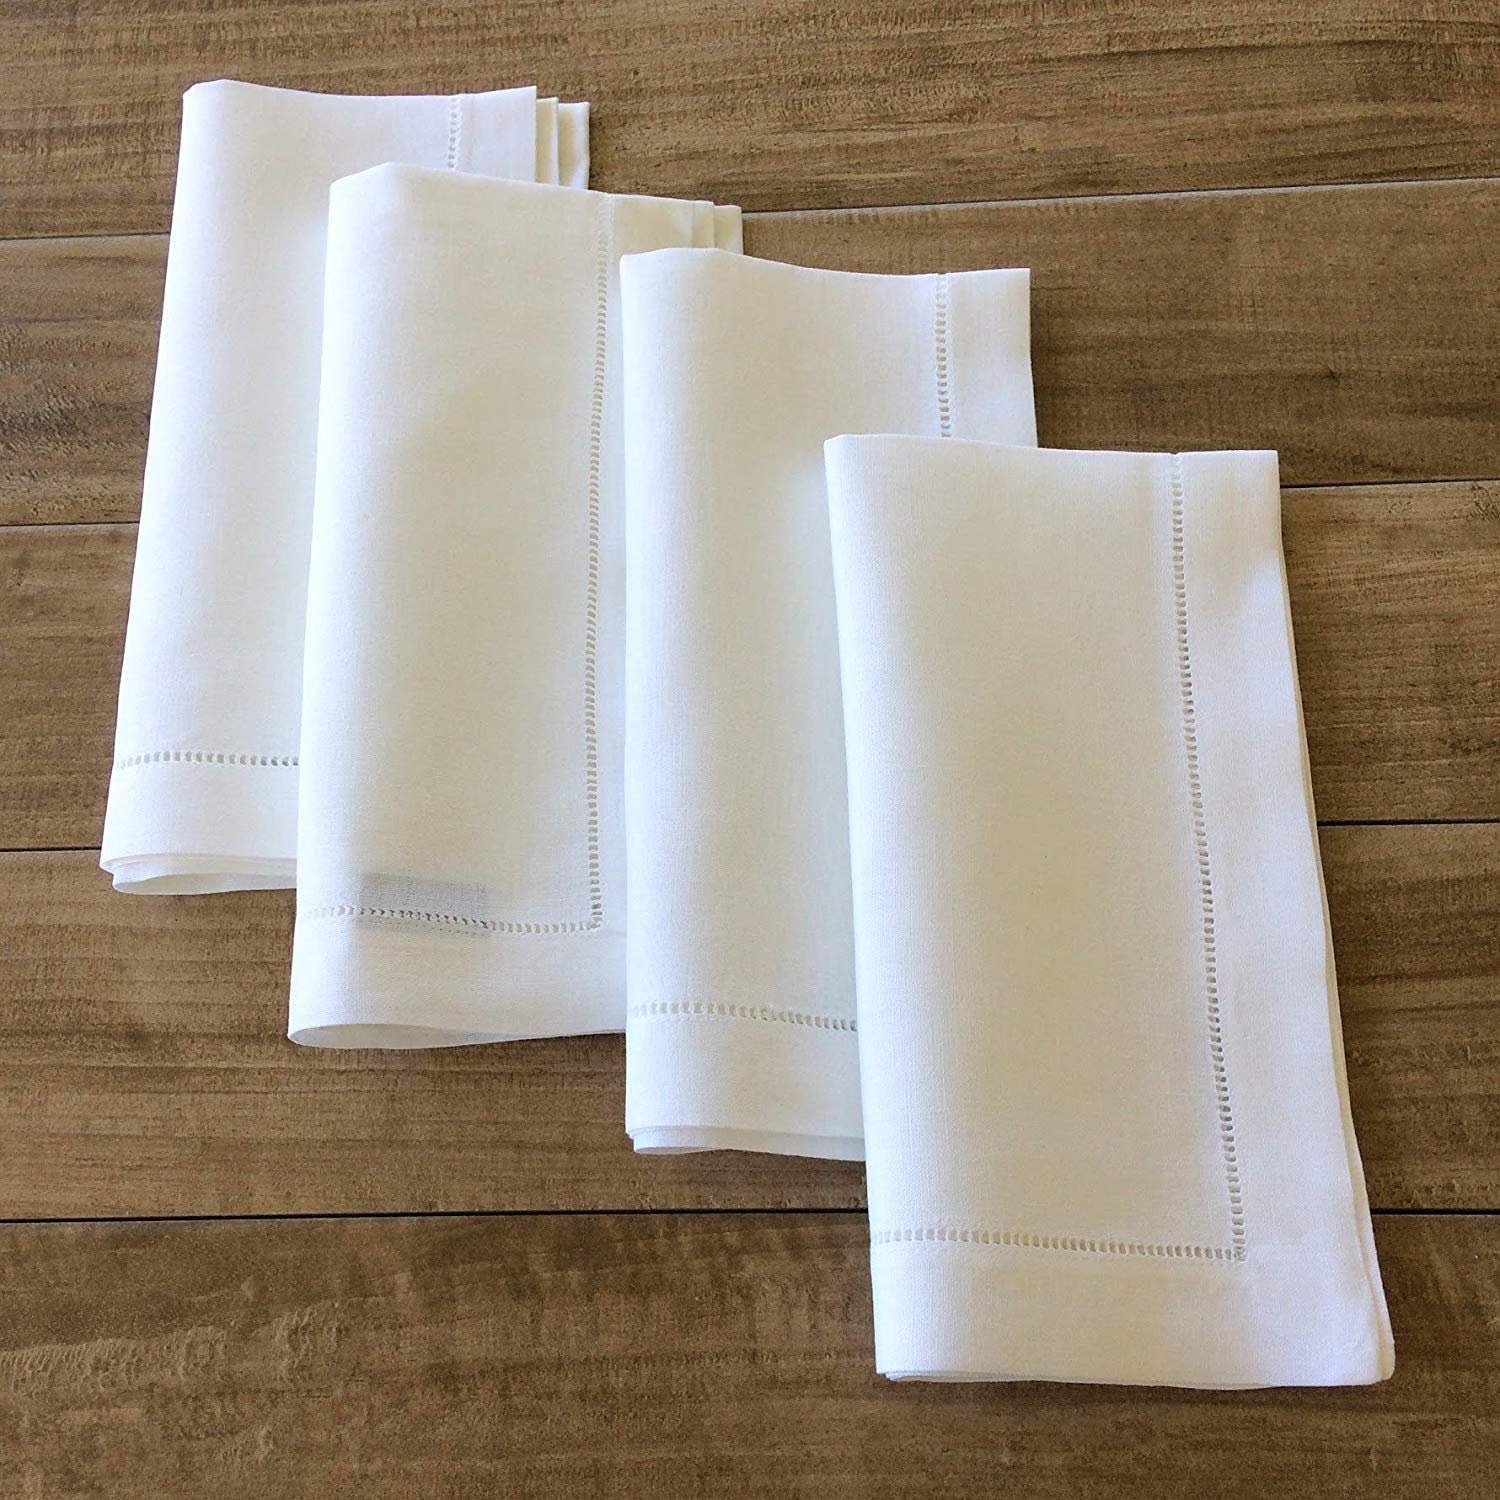 A Set of 50 Hemstitch Linen Napkins in White Color, 50x50 Cm 20x20 